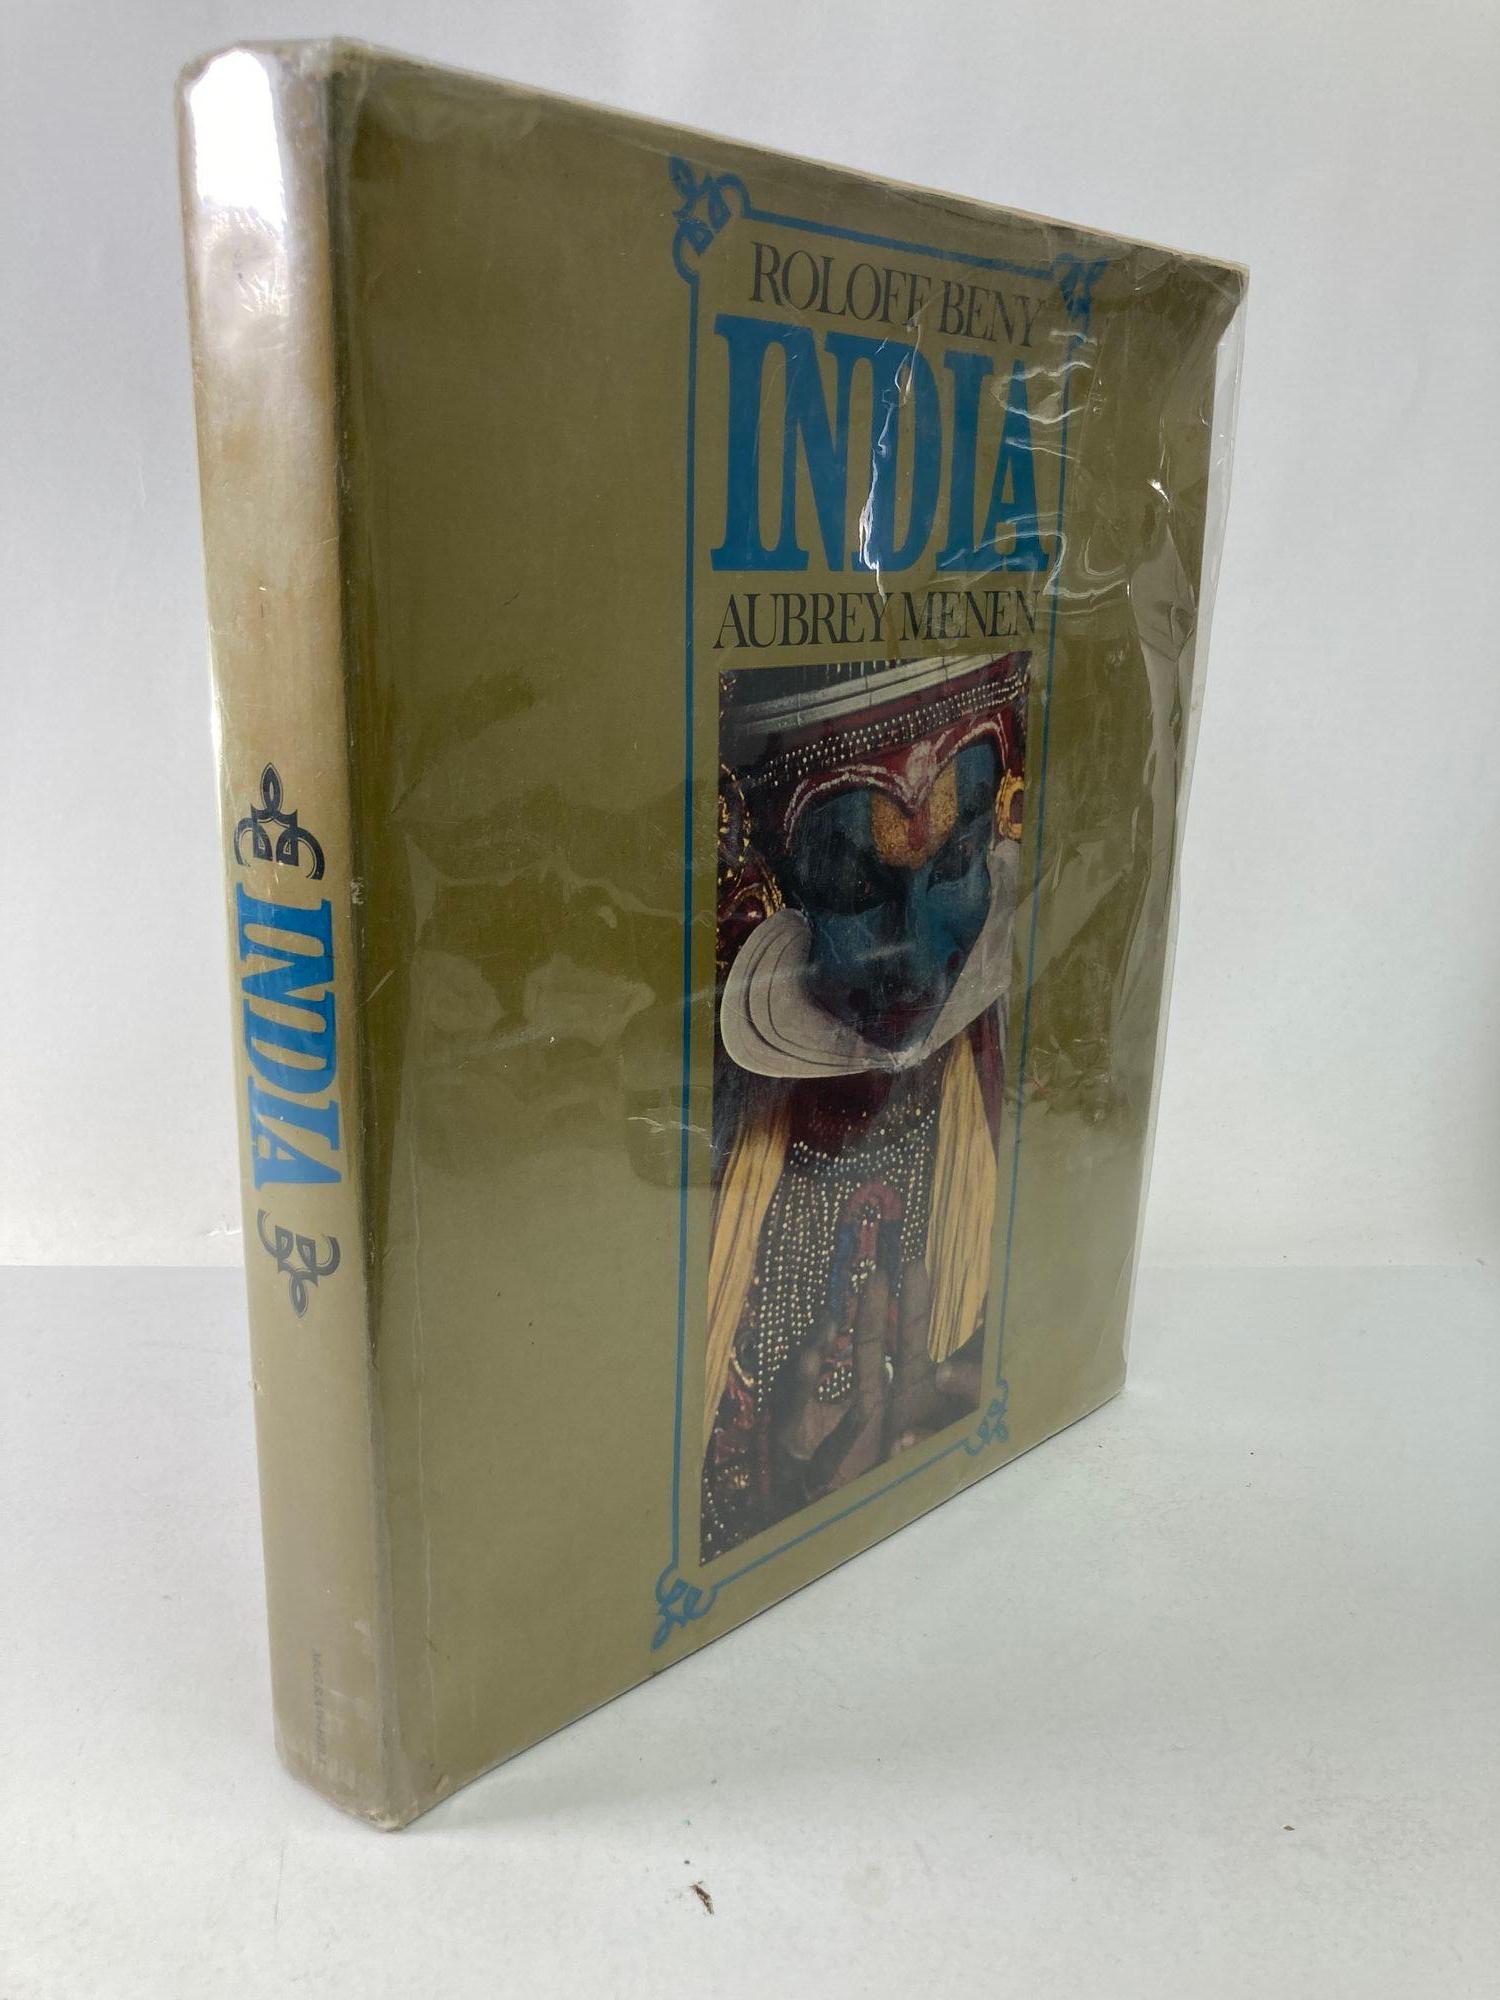 India. Designed and Photographed by Roloff Beny. Essay by Aubrey Menen. First Edition
Title: Roloff Beny: India
Publisher: McGraw-Hill, New York
Publication Date: 1969
Binding: Hardcover
Dust Jacket Condition: Dust Jacket Included
Edition: 1st